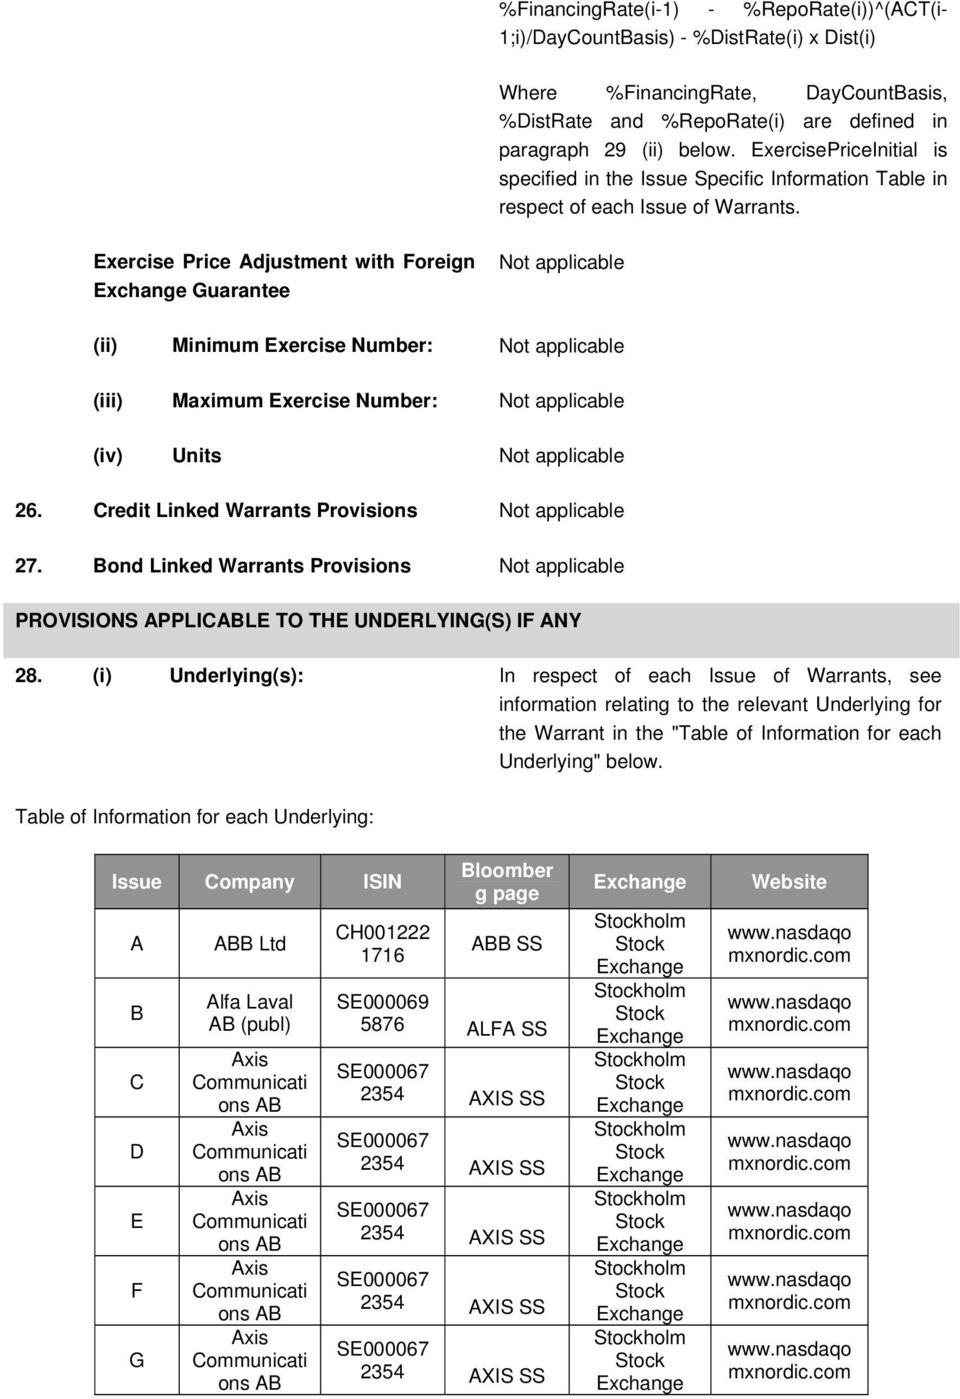 Exercise Price Adjustment with Foreign Guarantee Not applicable (ii) Minimum Exercise Number: Not applicable (iii) Maximum Exercise Number: Not applicable (iv) Units Not applicable 26.